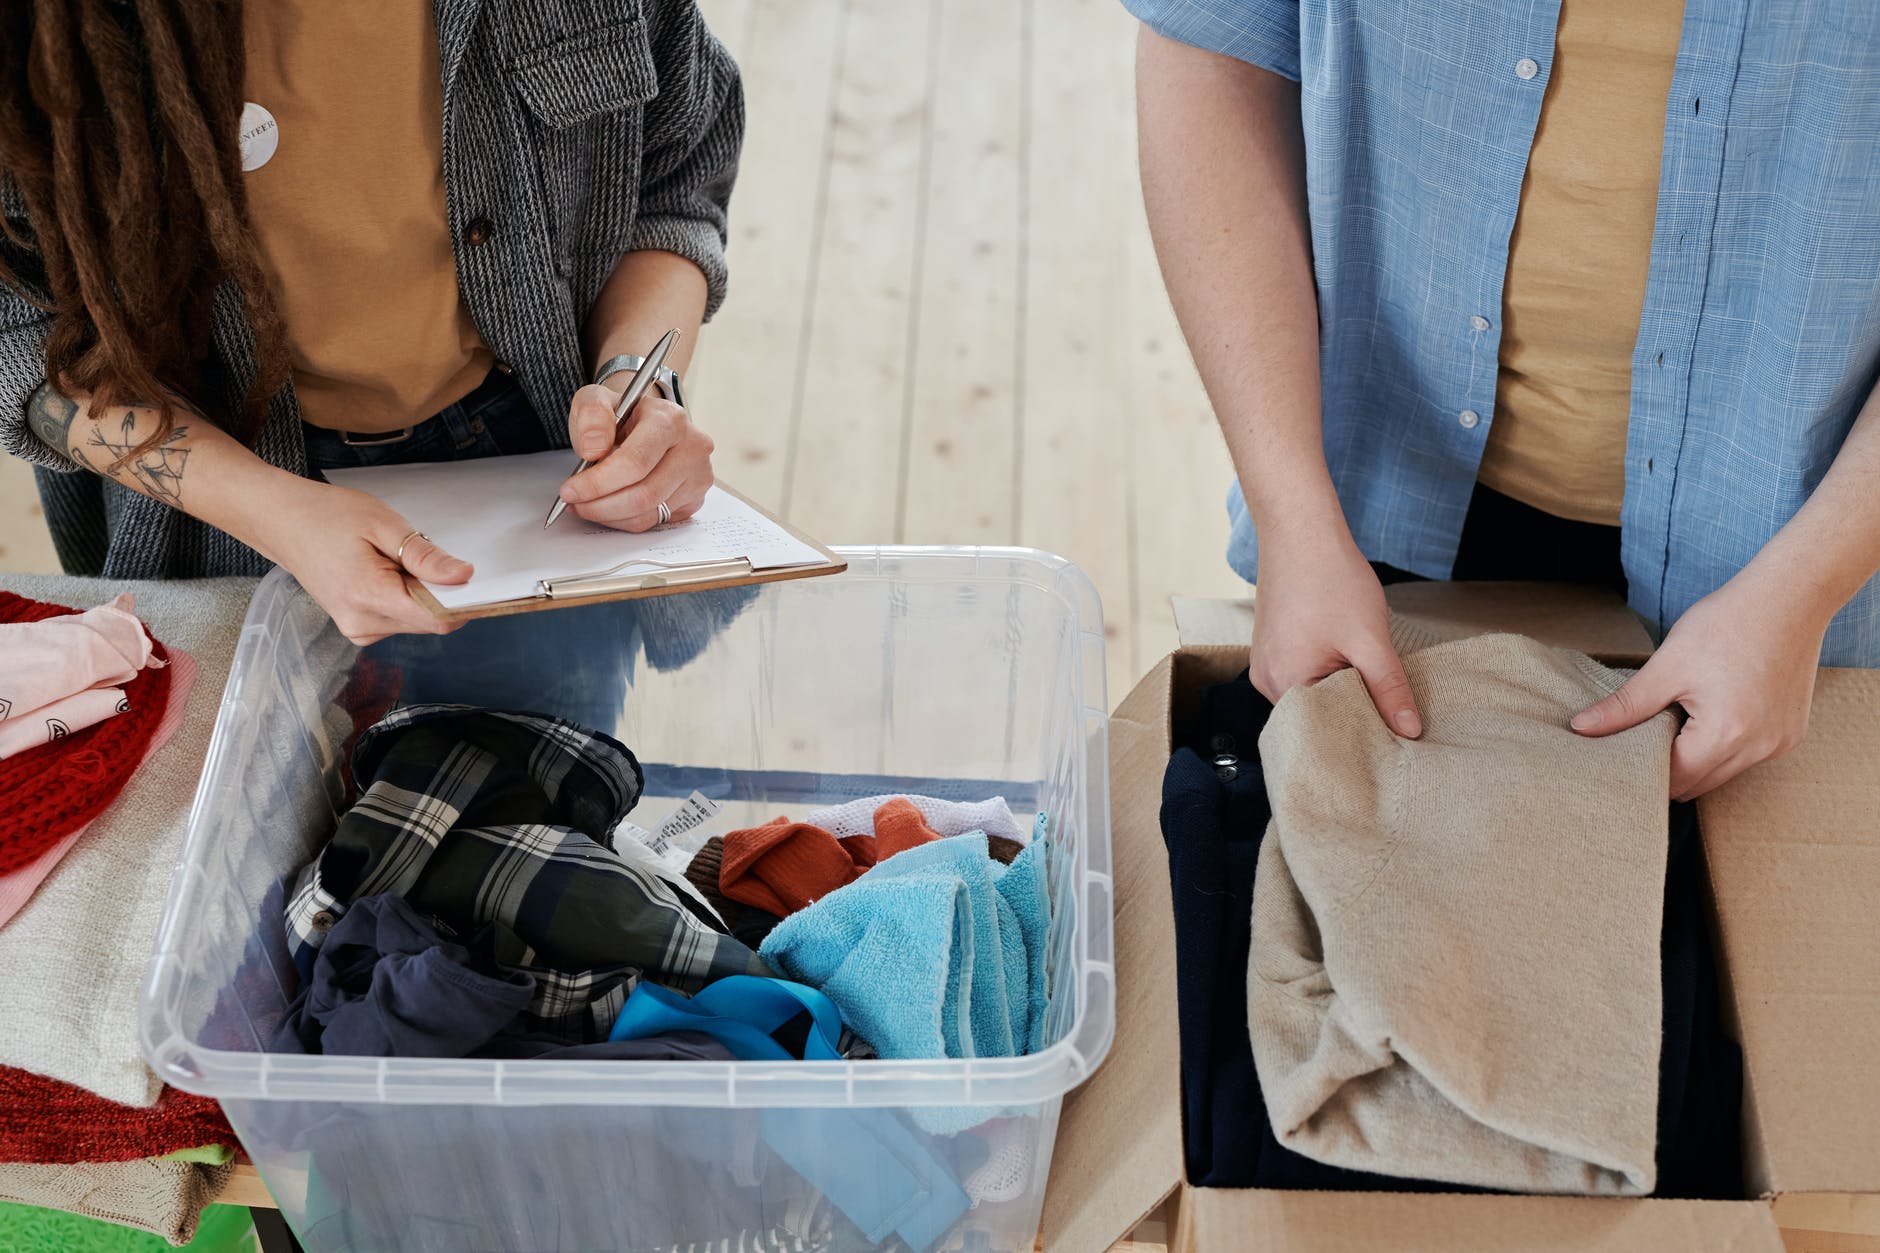 The siblings were packing up Fiona's house. | Source: Pexels